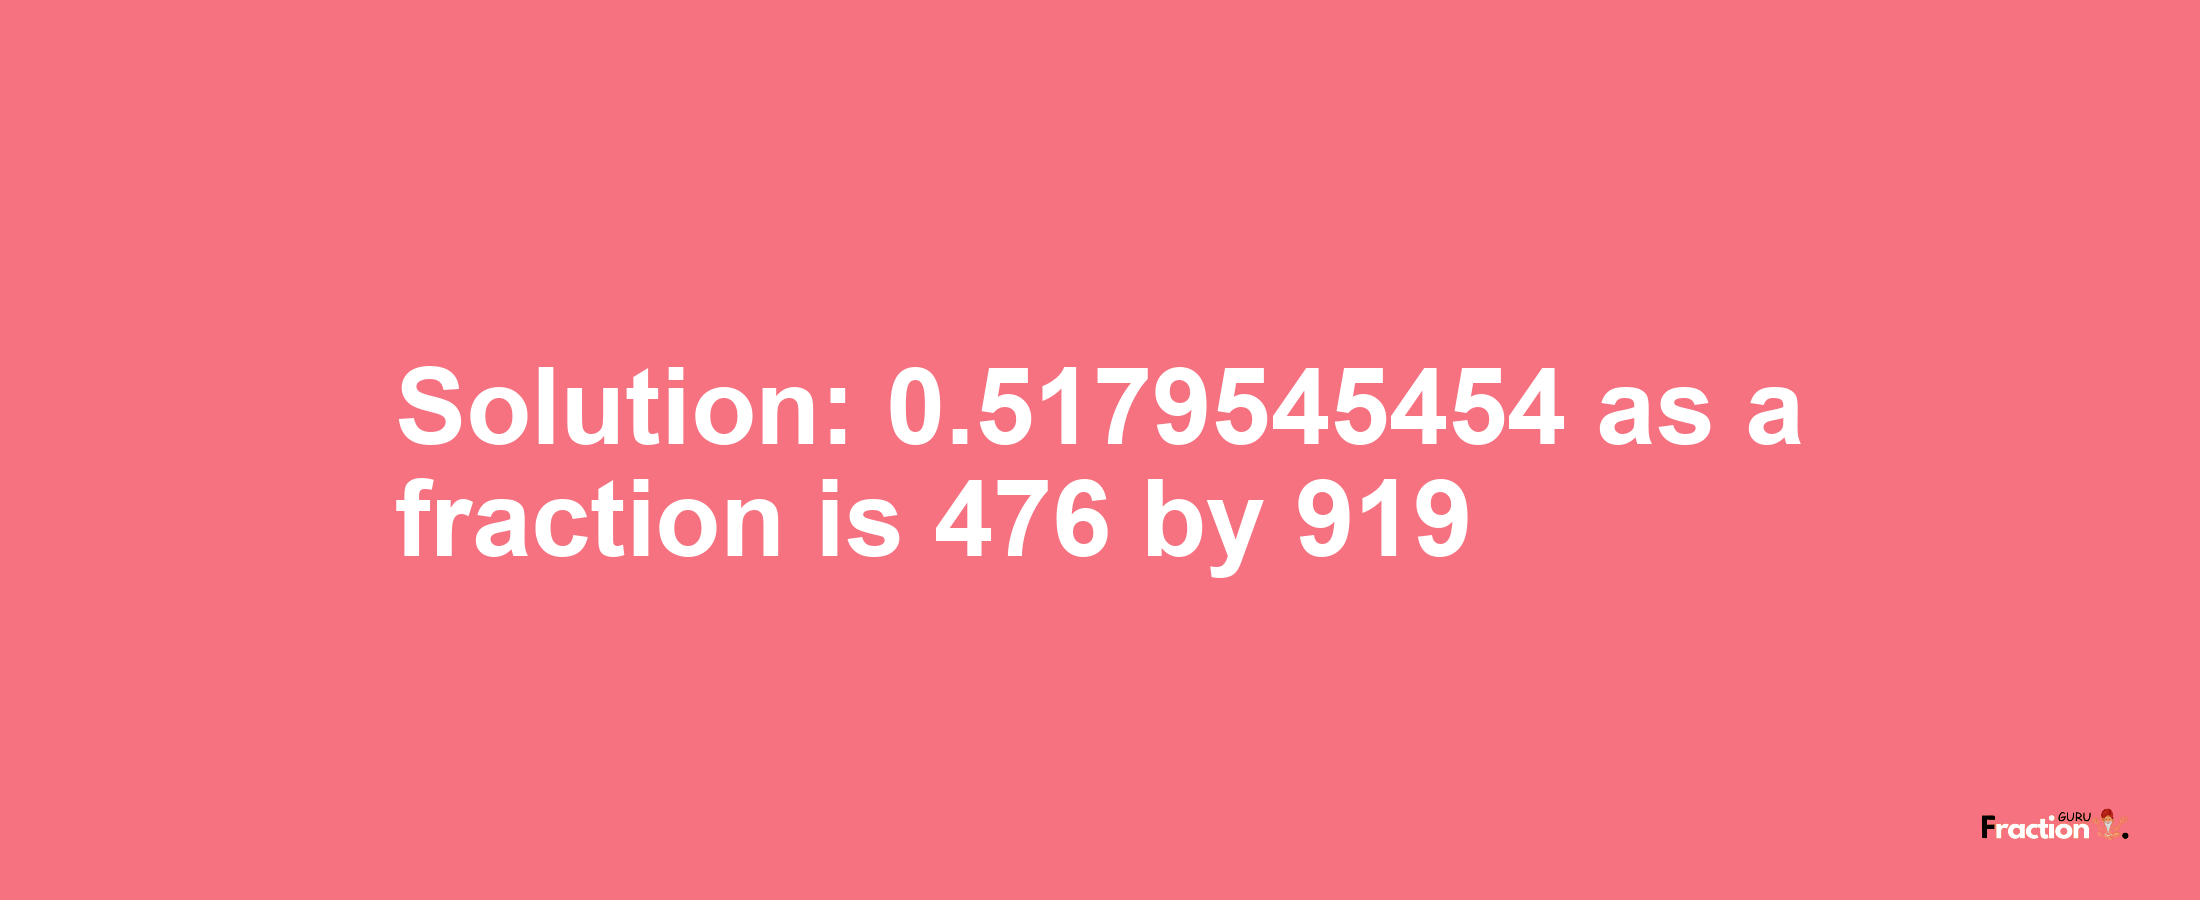 Solution:0.5179545454 as a fraction is 476/919